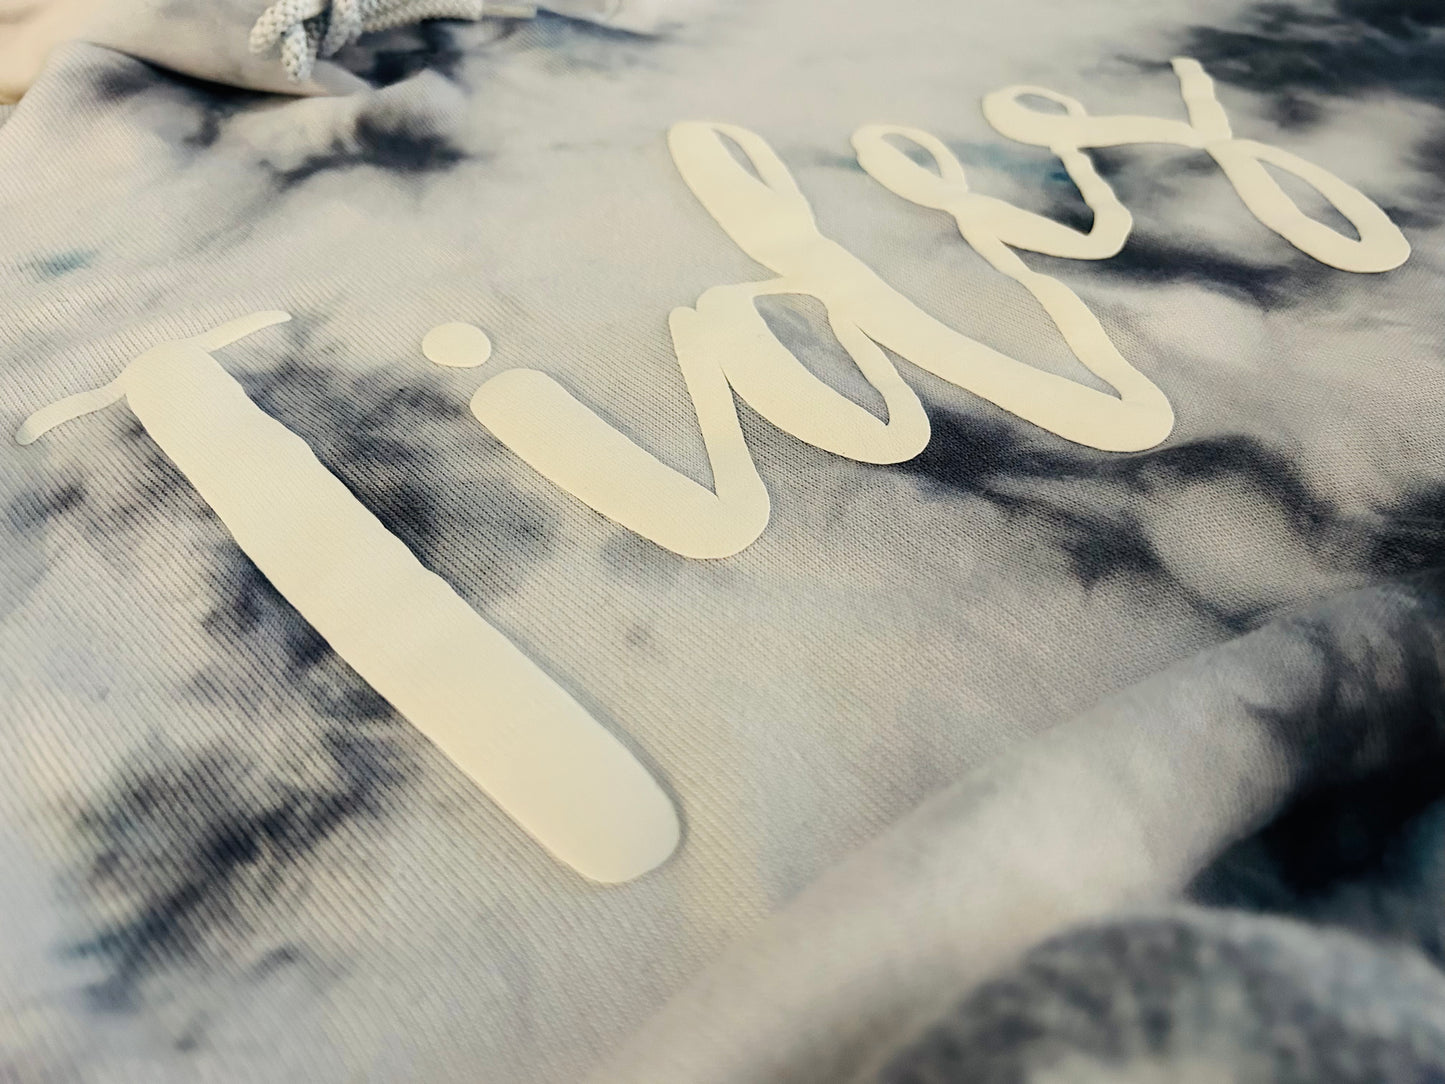 Tides Tie Dye Crewneck and Hooded - Adult and Youth